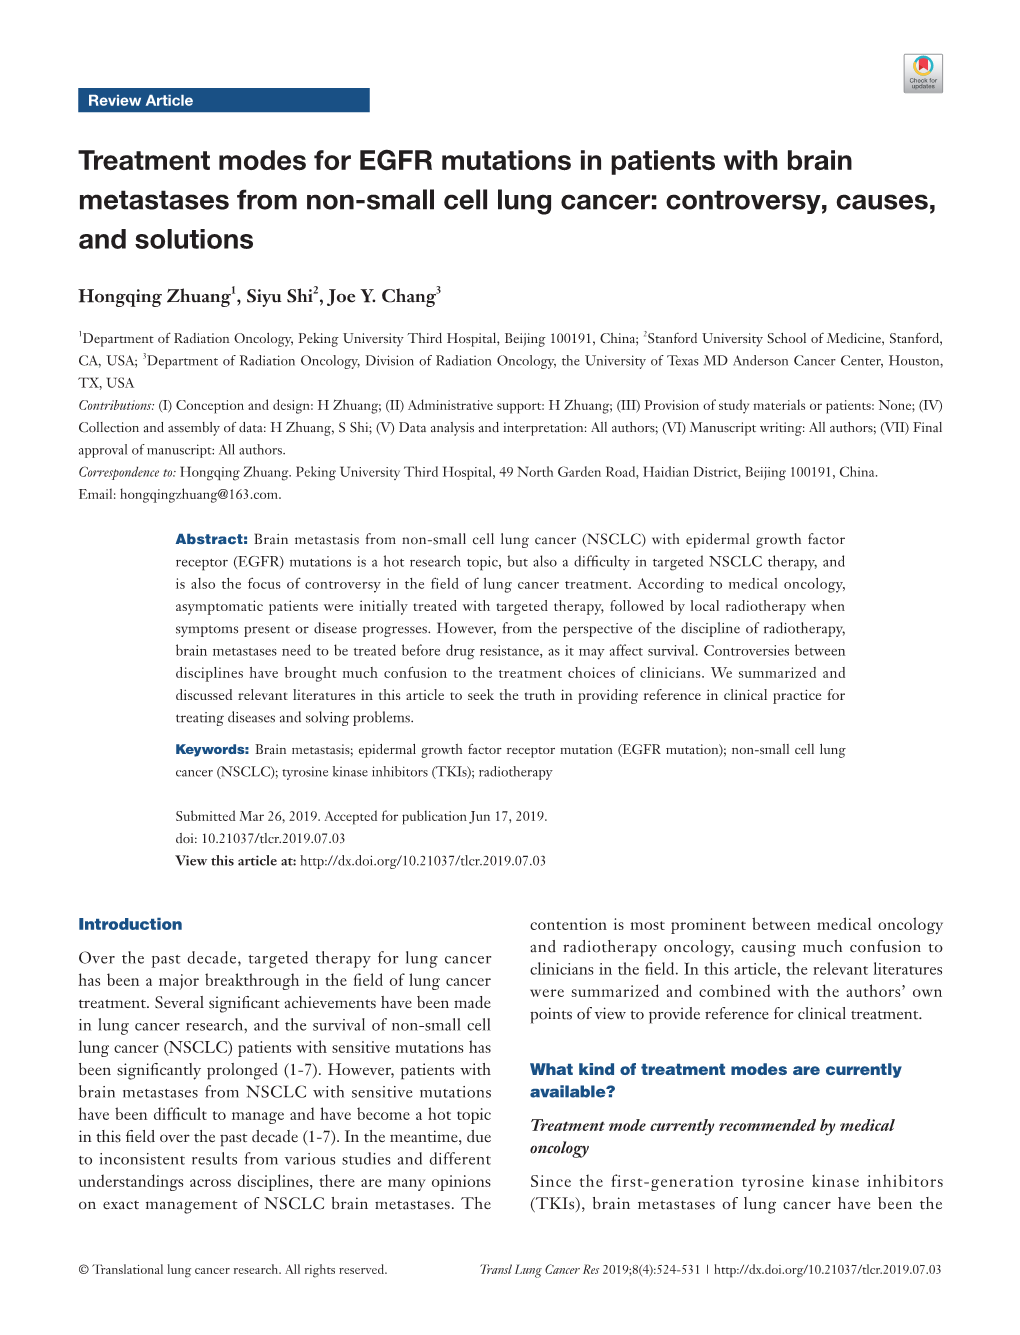 Treatment Modes for EGFR Mutations in Patients with Brain Metastases from Non-Small Cell Lung Cancer: Controversy, Causes, and Solutions